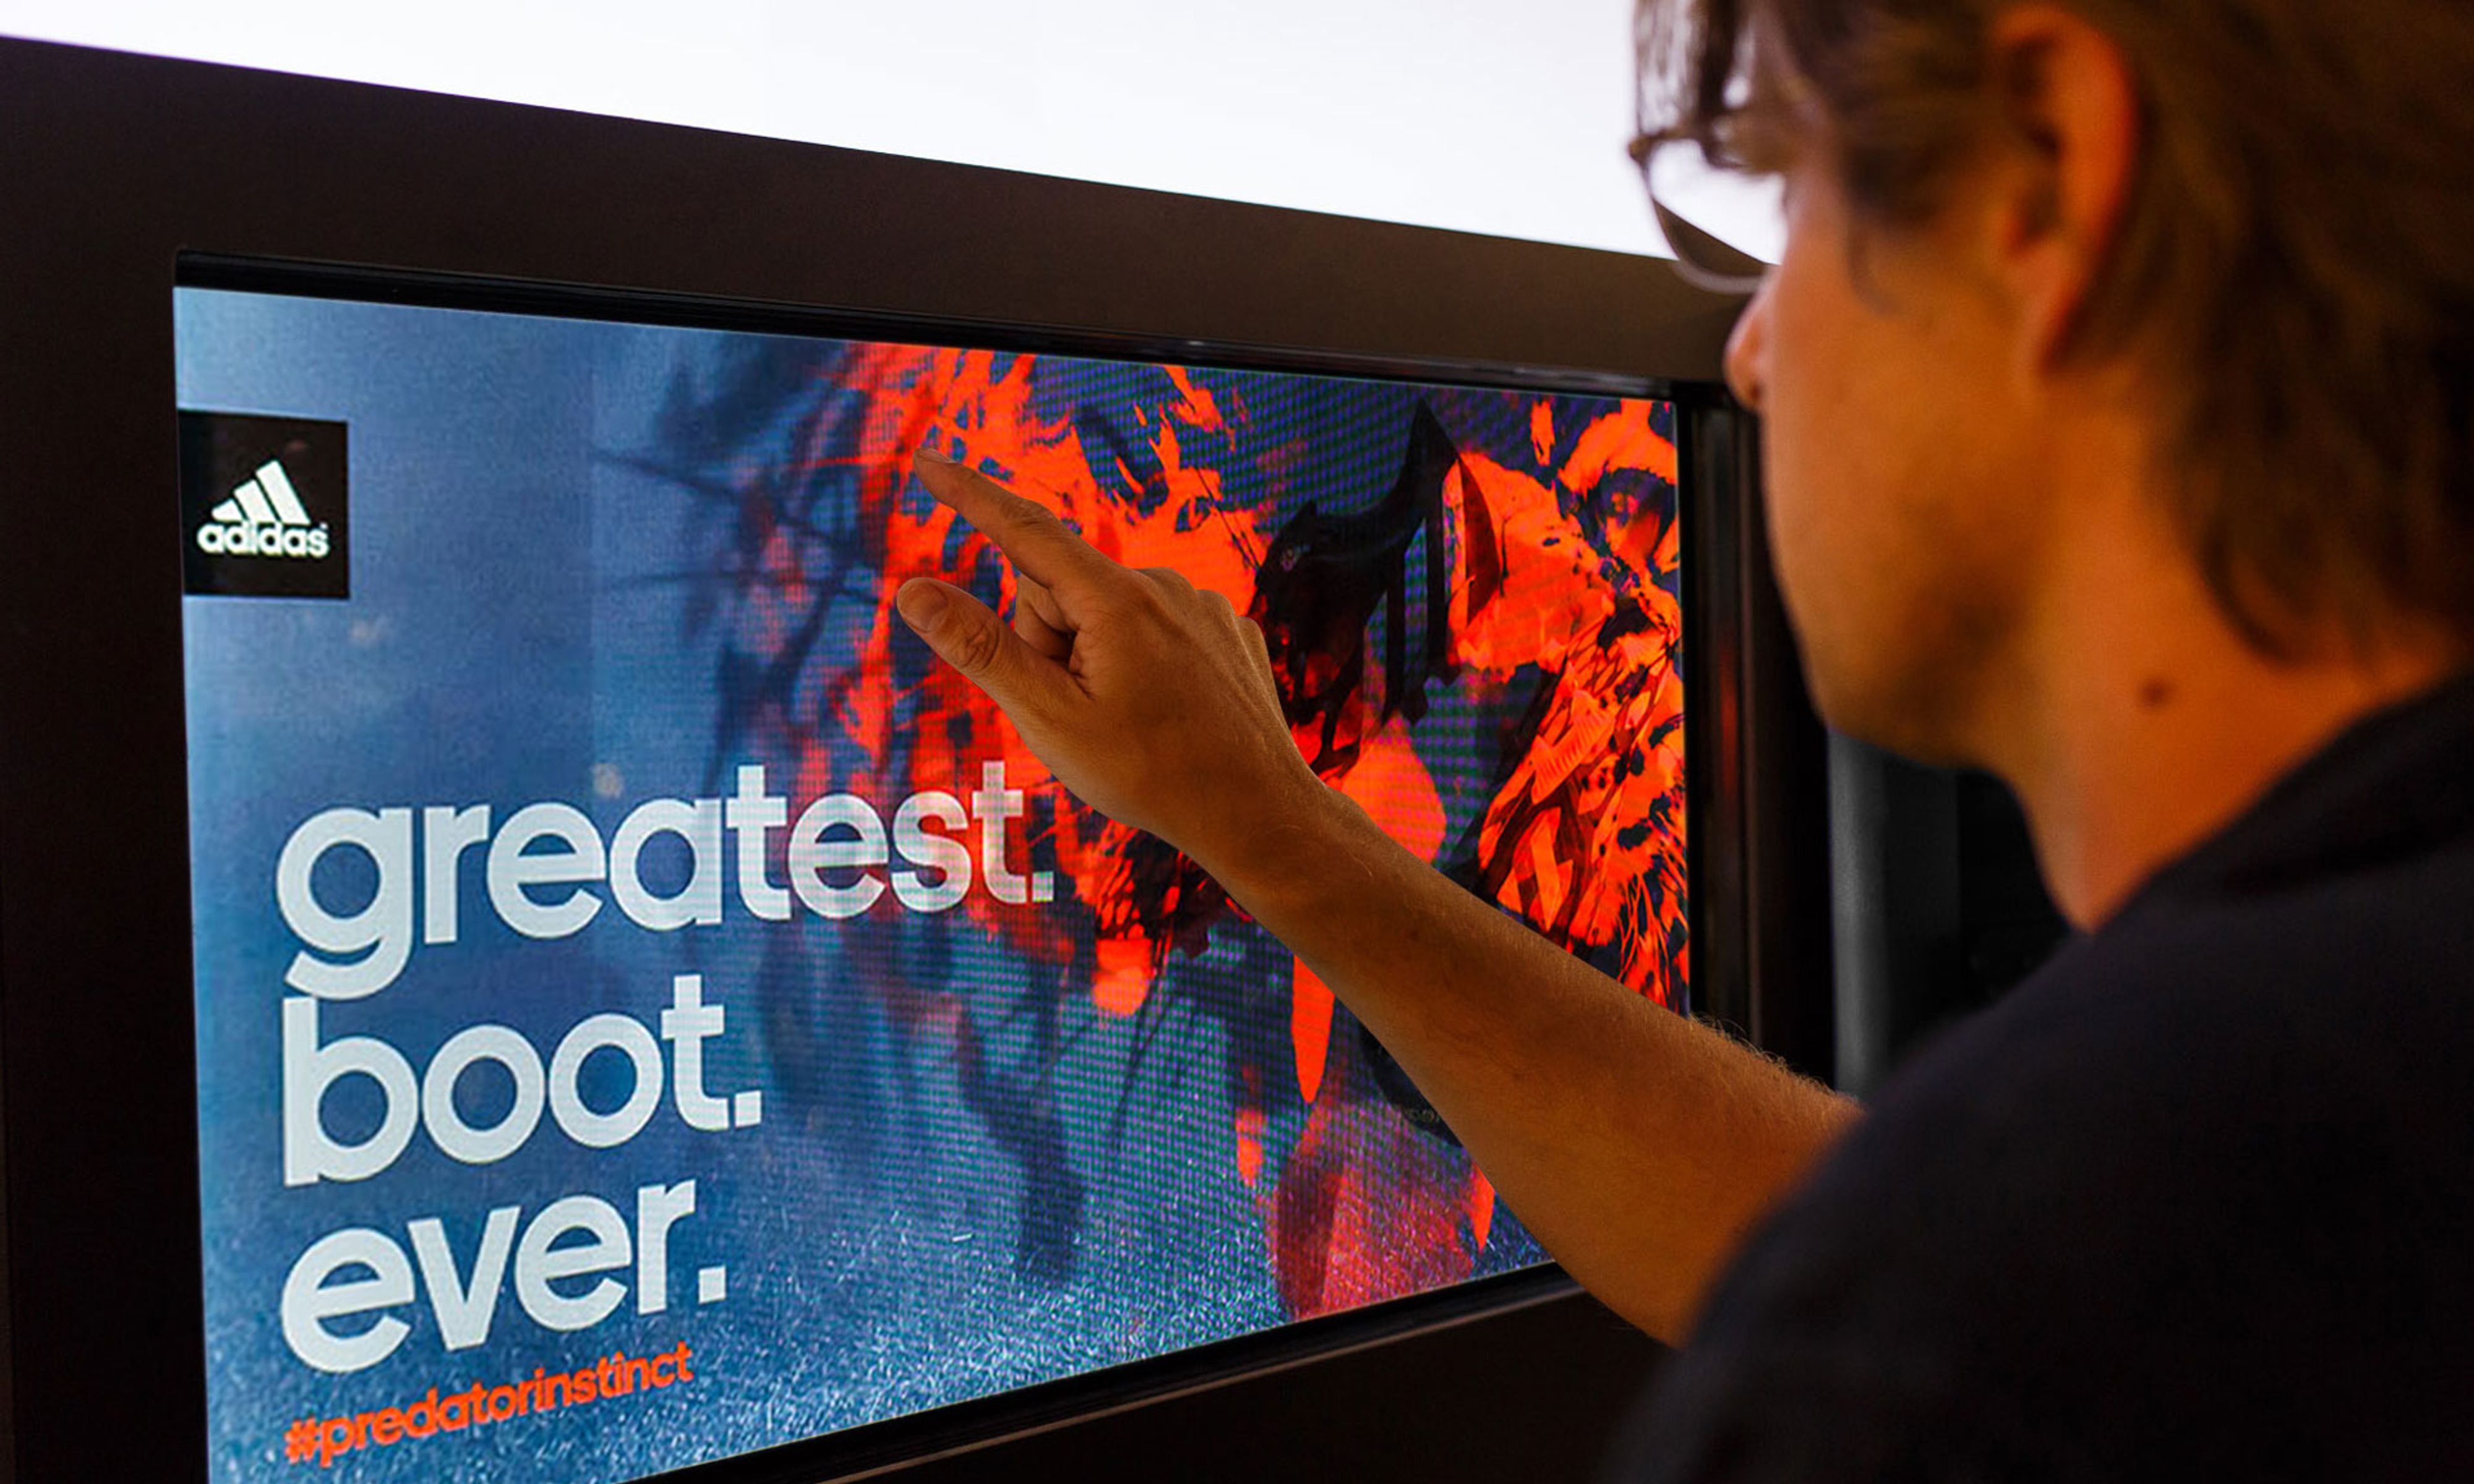 Person touching a touch screen that reads “Greatest. Boot. Ever.”